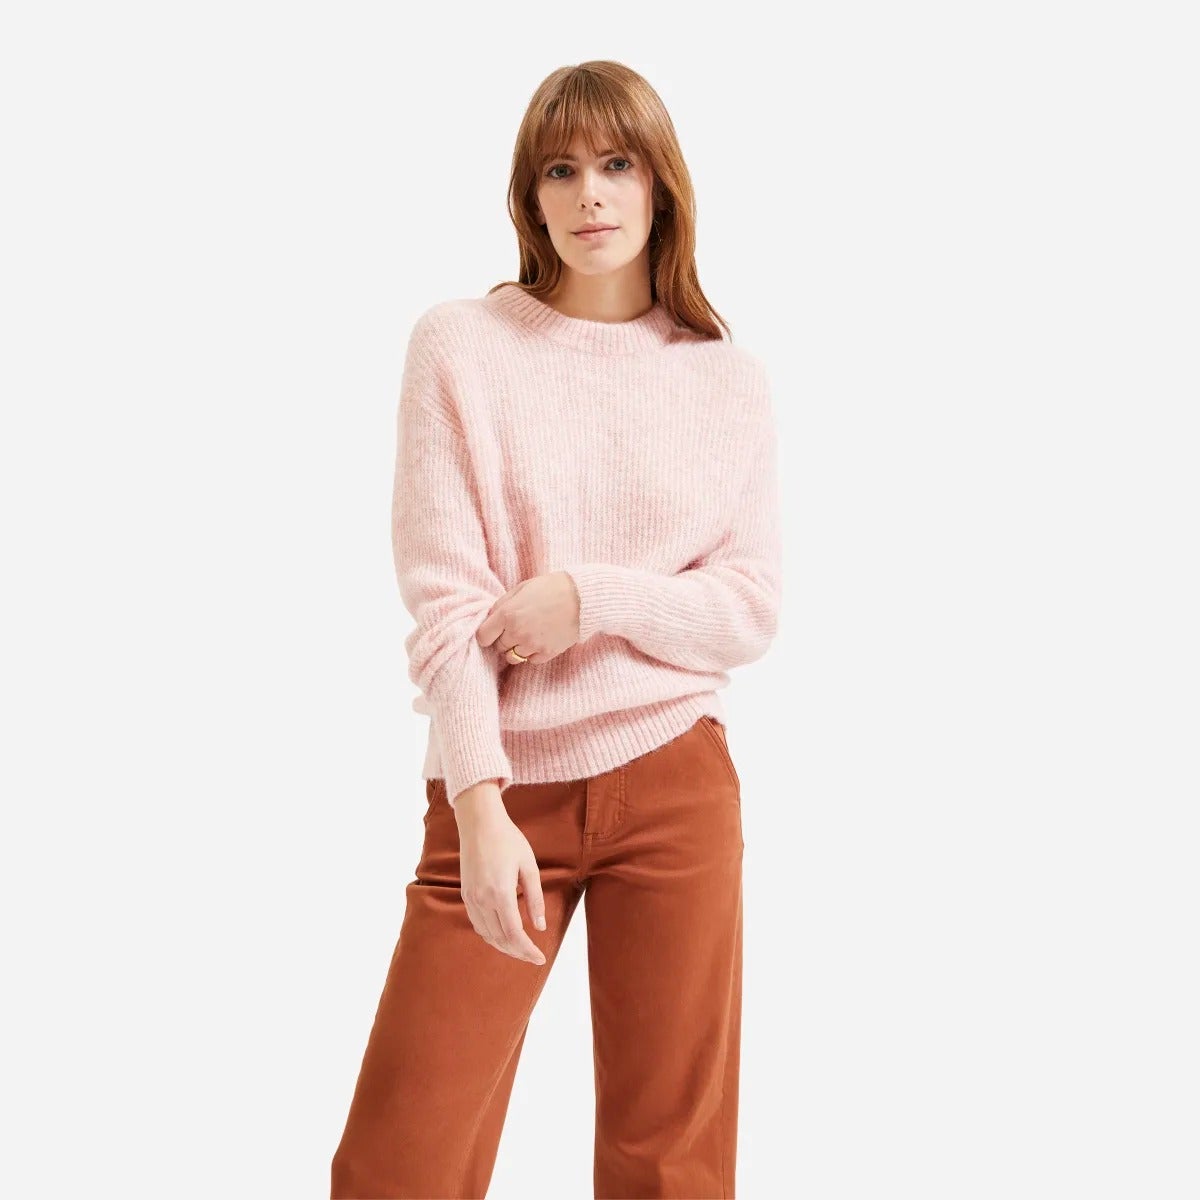 Everlane + 30 Oversized Jumpers For Those Who Want To Go Big